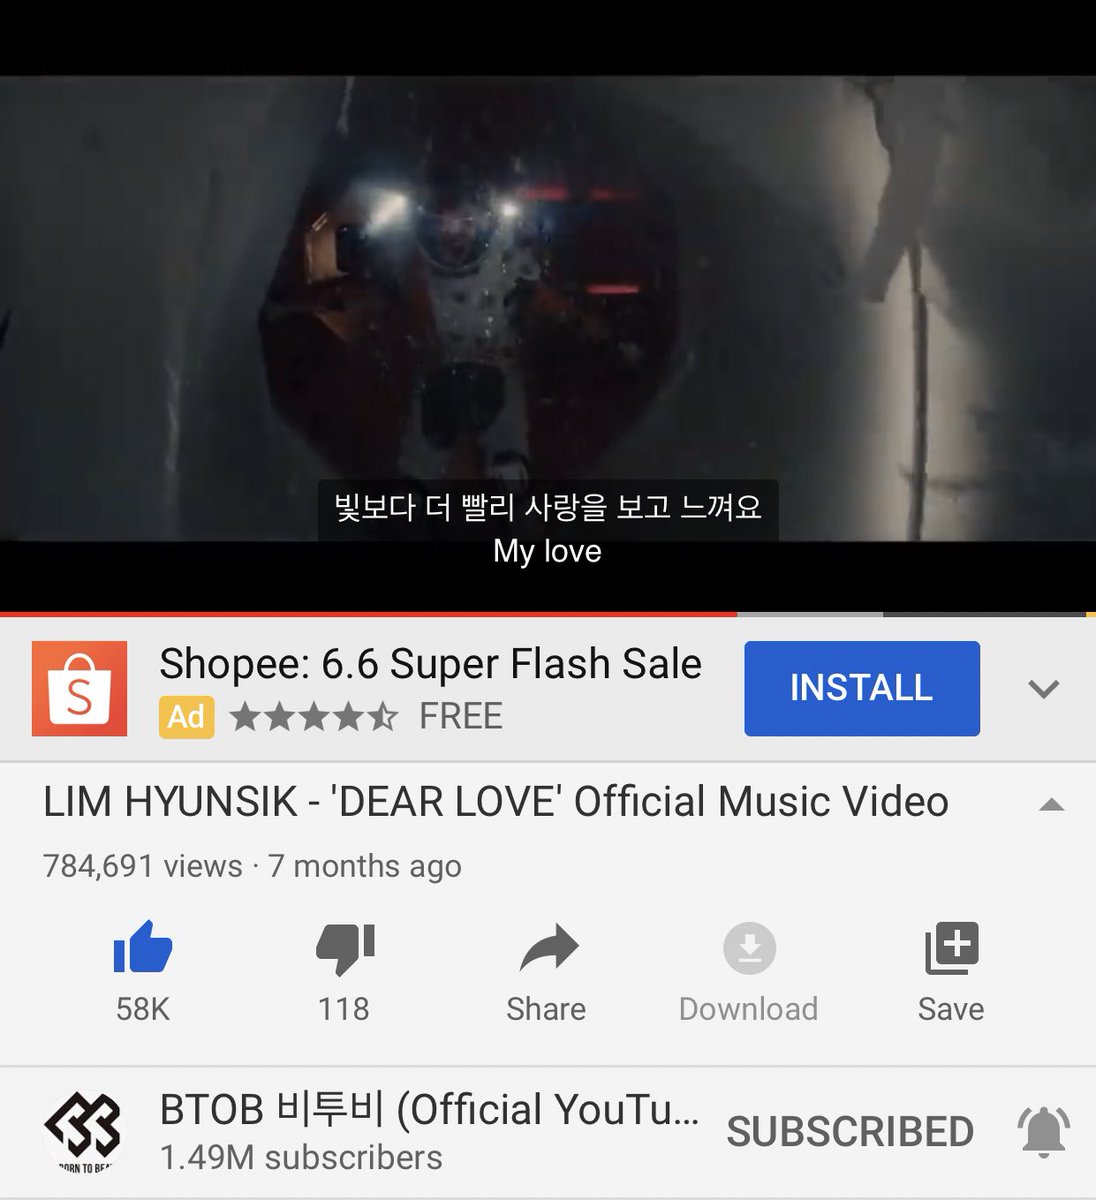 Dear Love view count streaming thread 29MAY2020 4:42PM KST784,691